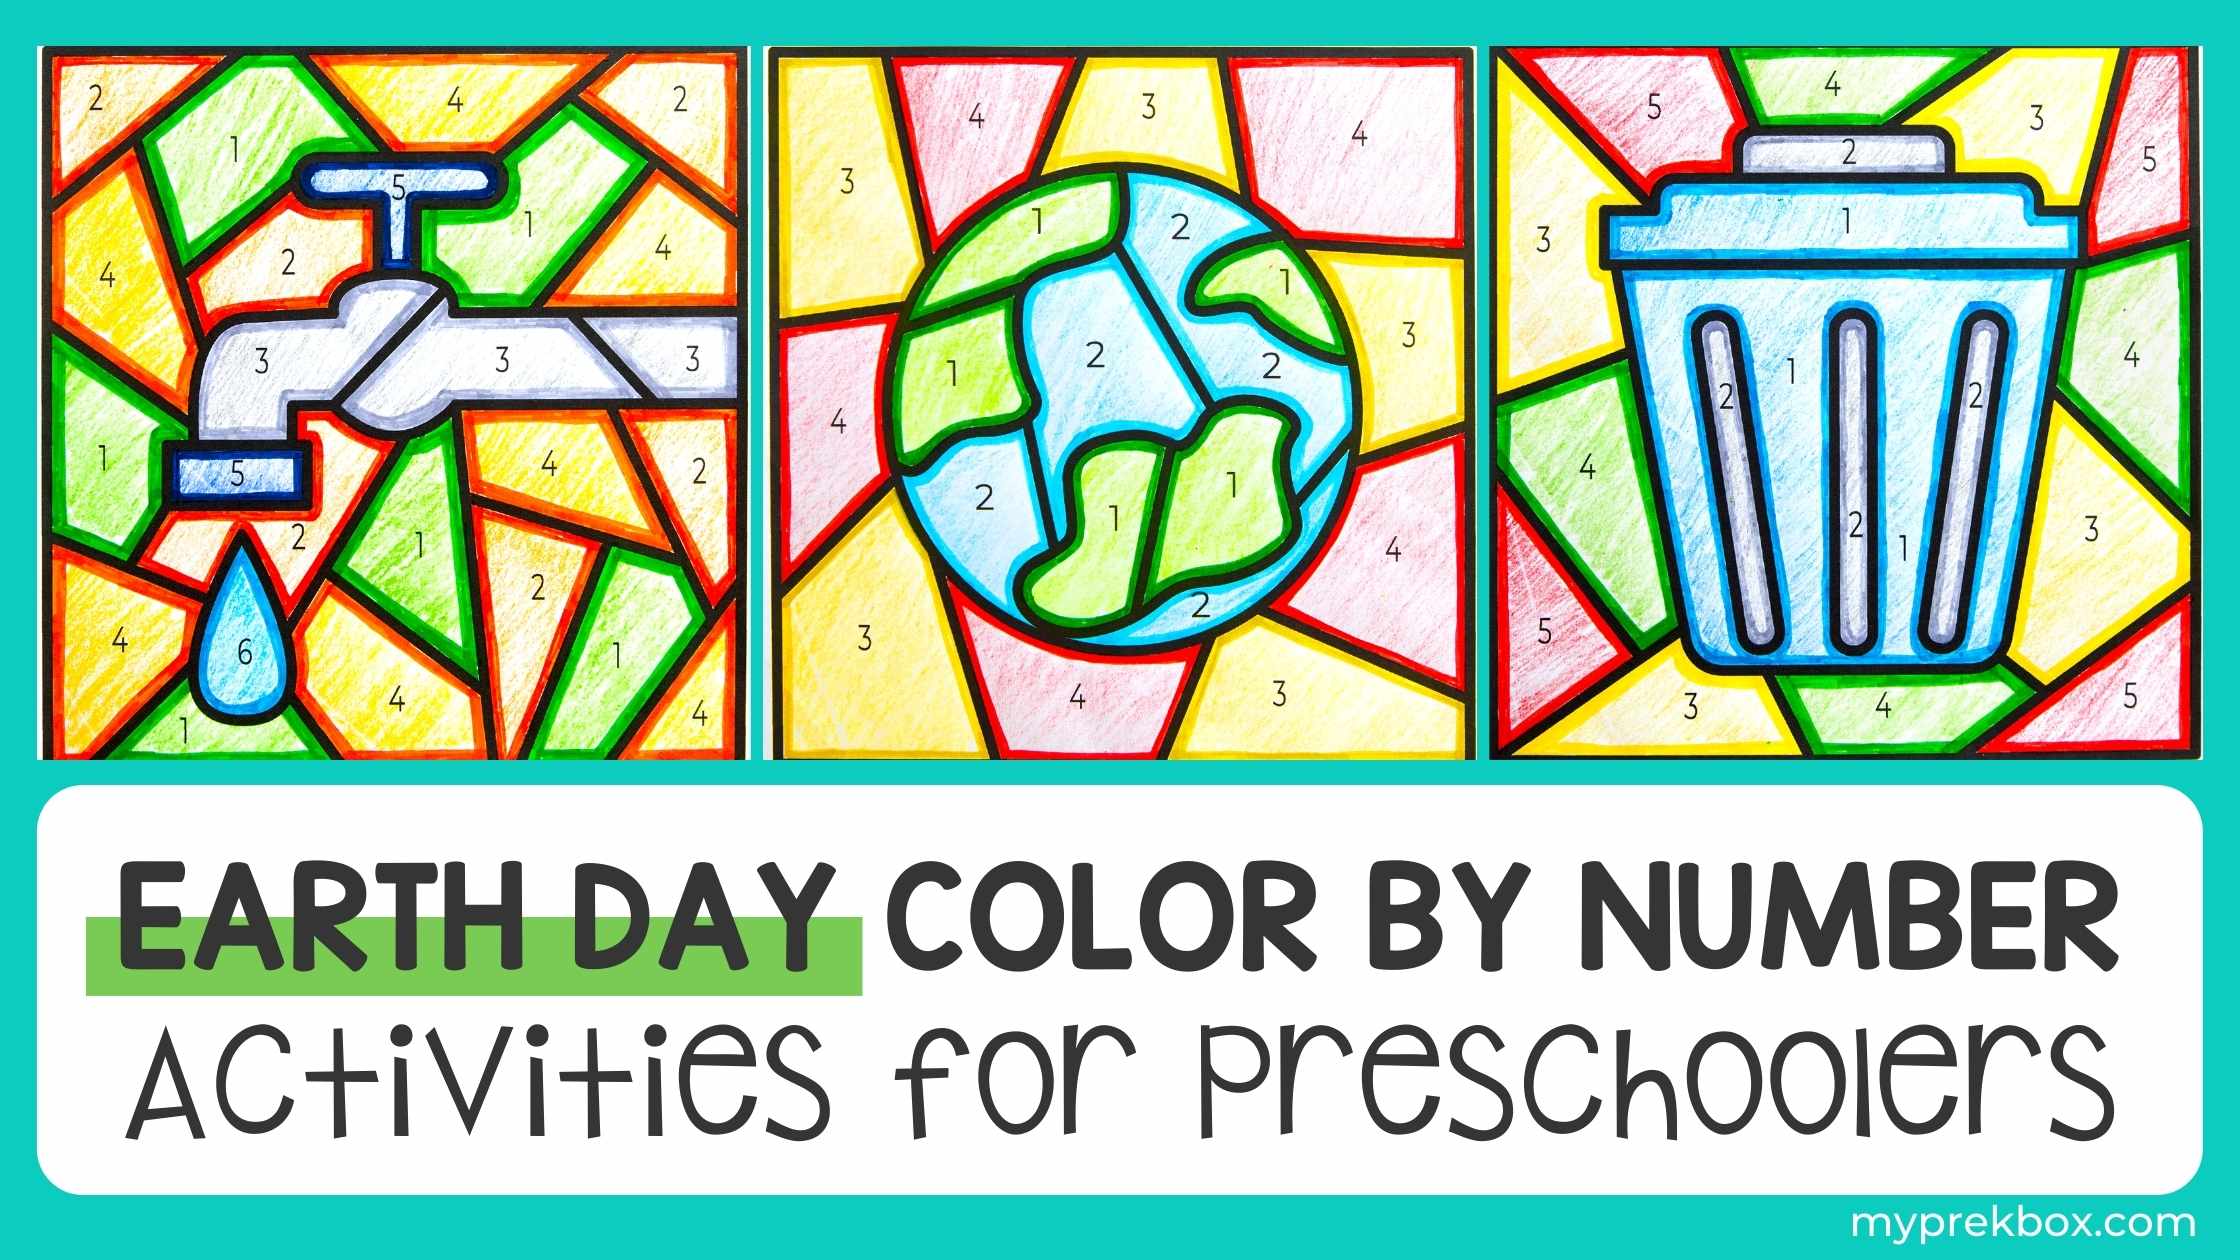 Crayons coloring page activity for preschool-Worksheets kids